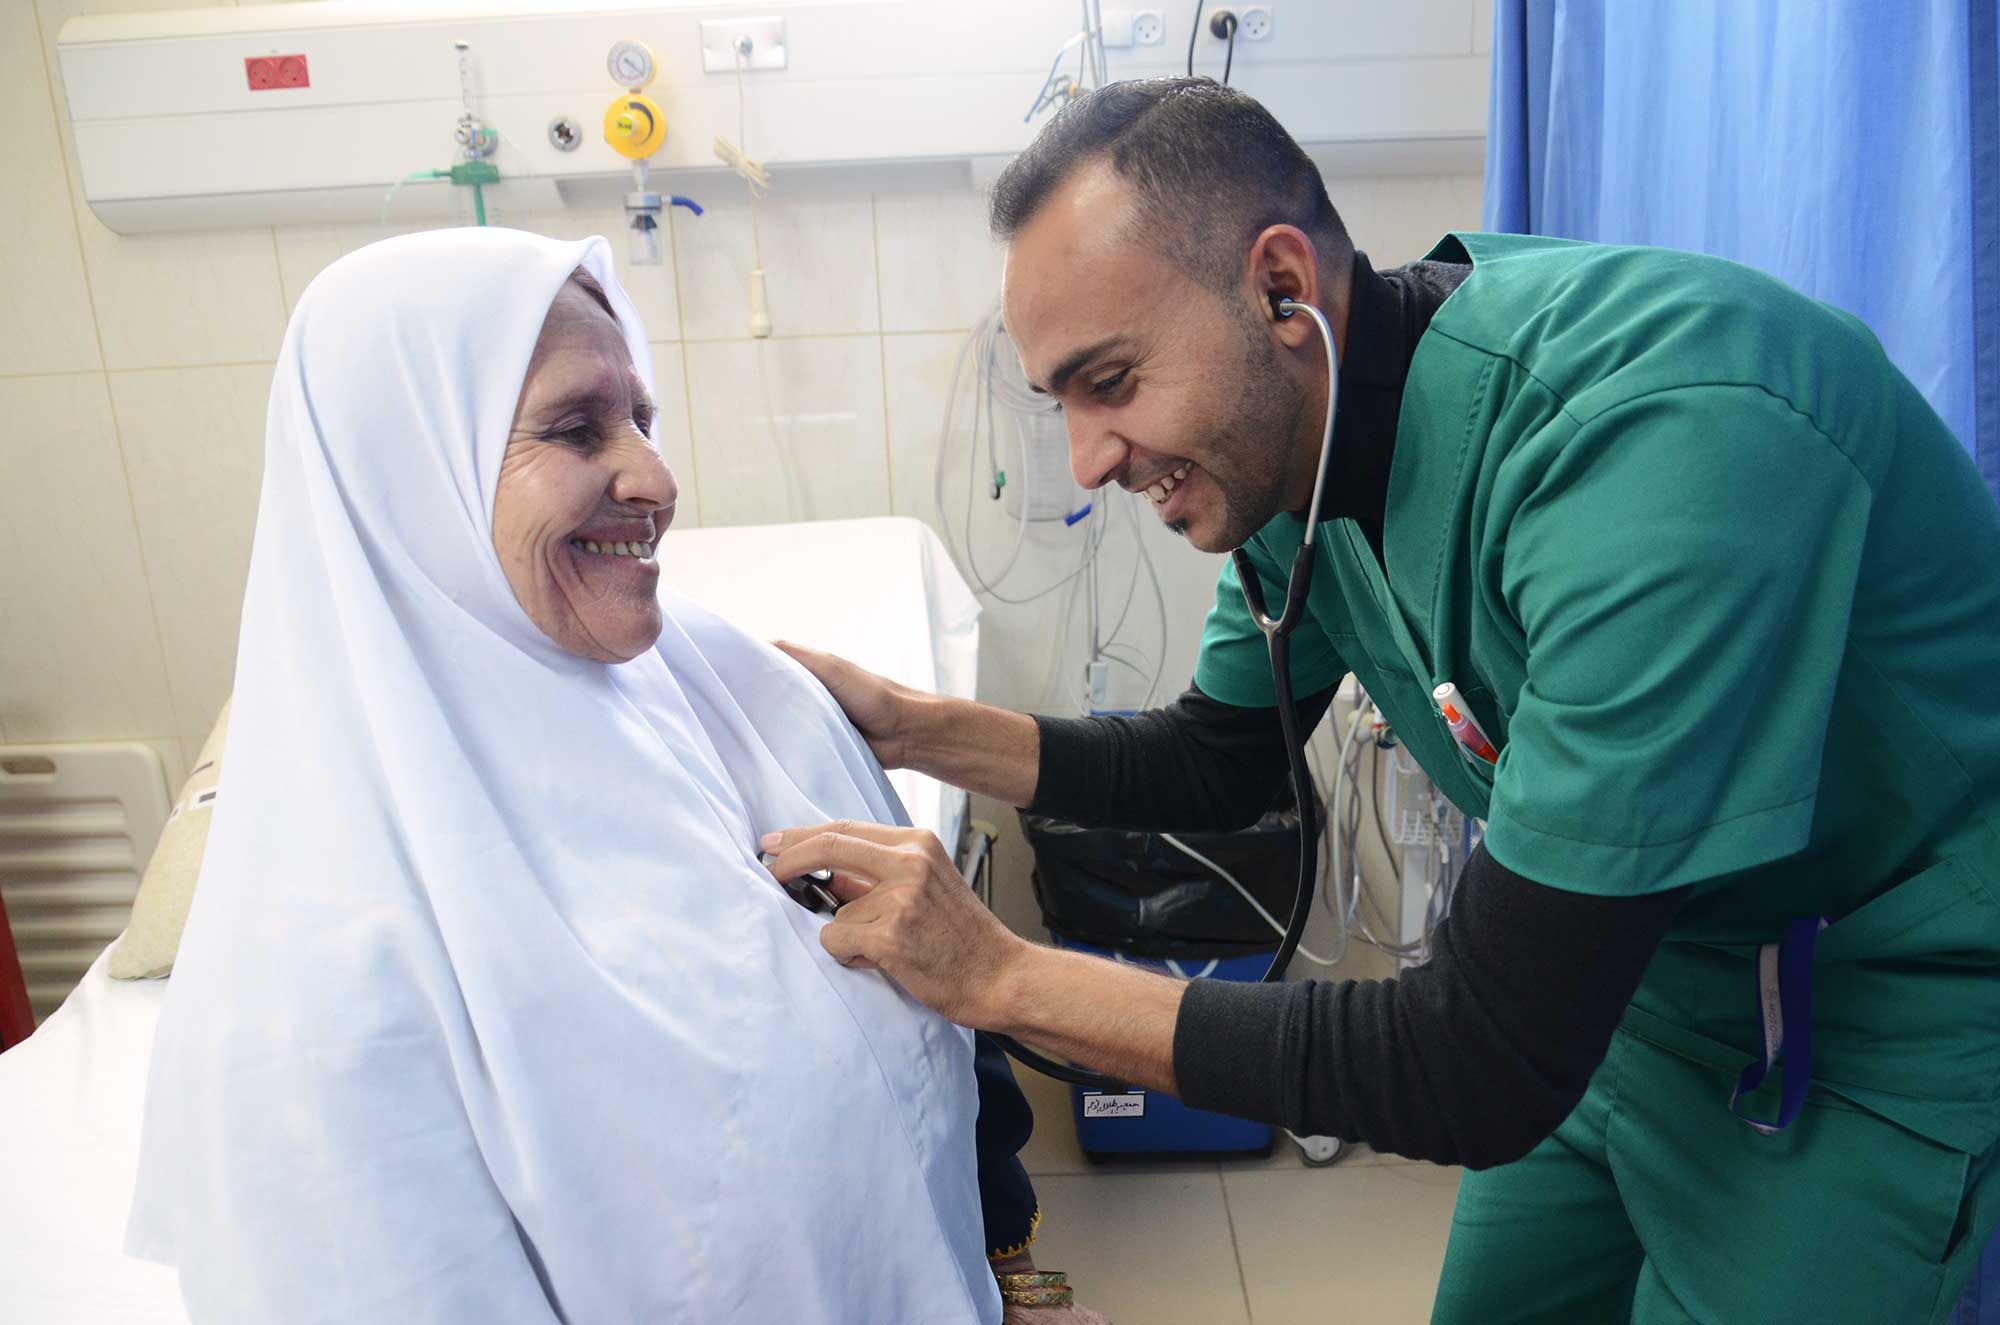 Lebanon, West Bank and Gaza hospitals need long-term solutions.